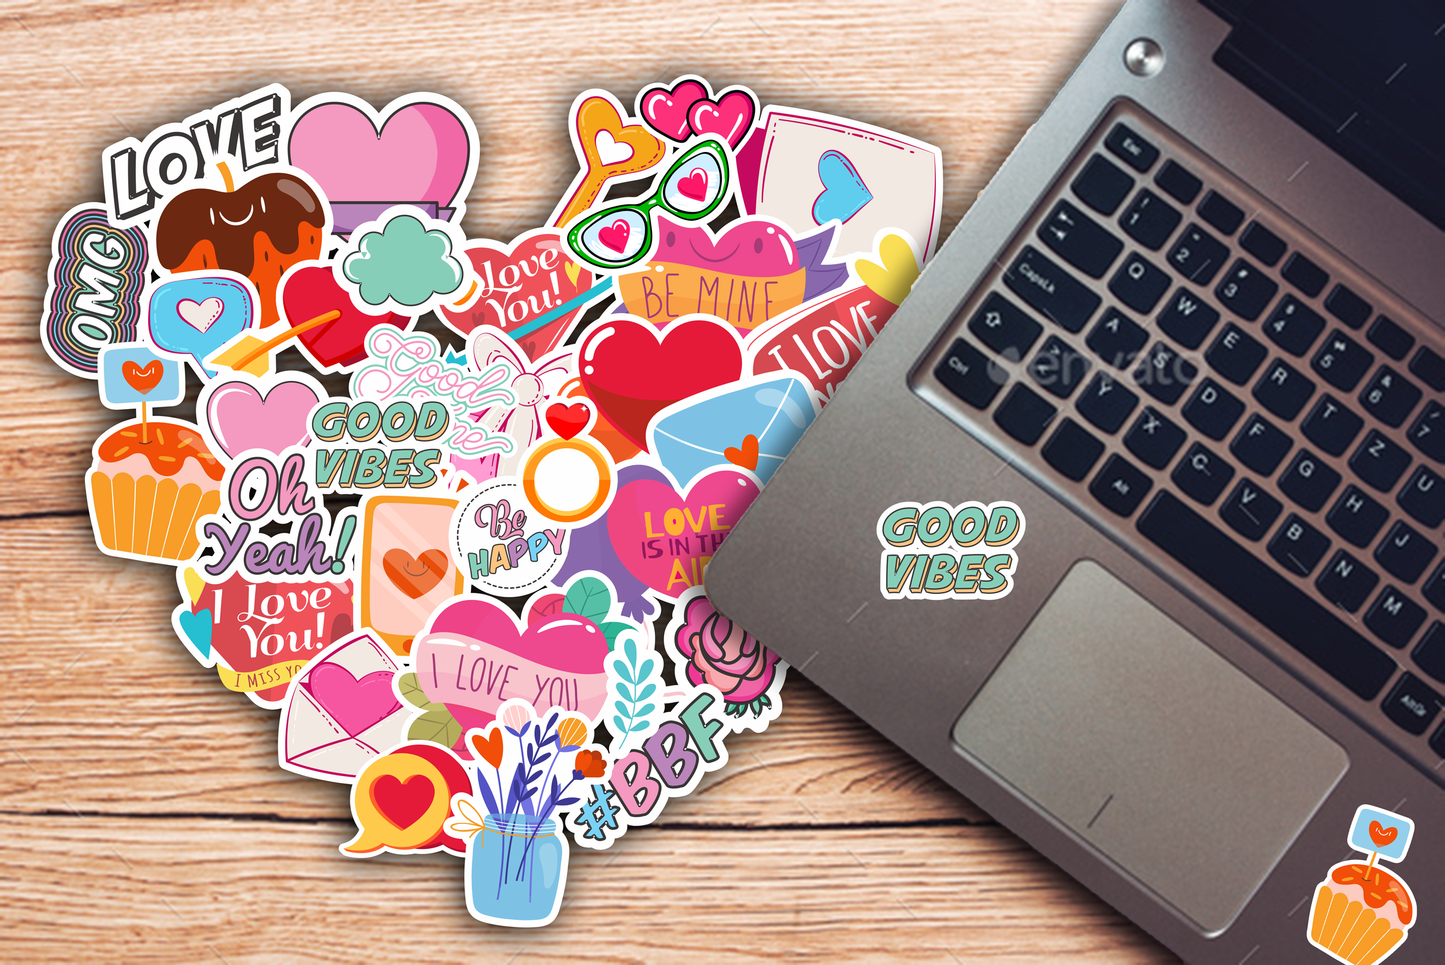 iberry's 50 pcs Stickers for Laptop Mobile Phones Computer Bicycle Luggage Scrapbooks Gadgets | Waterproof Stickers|Love Stickers| Laptop Sticker- Set of 50 Stickers (02)